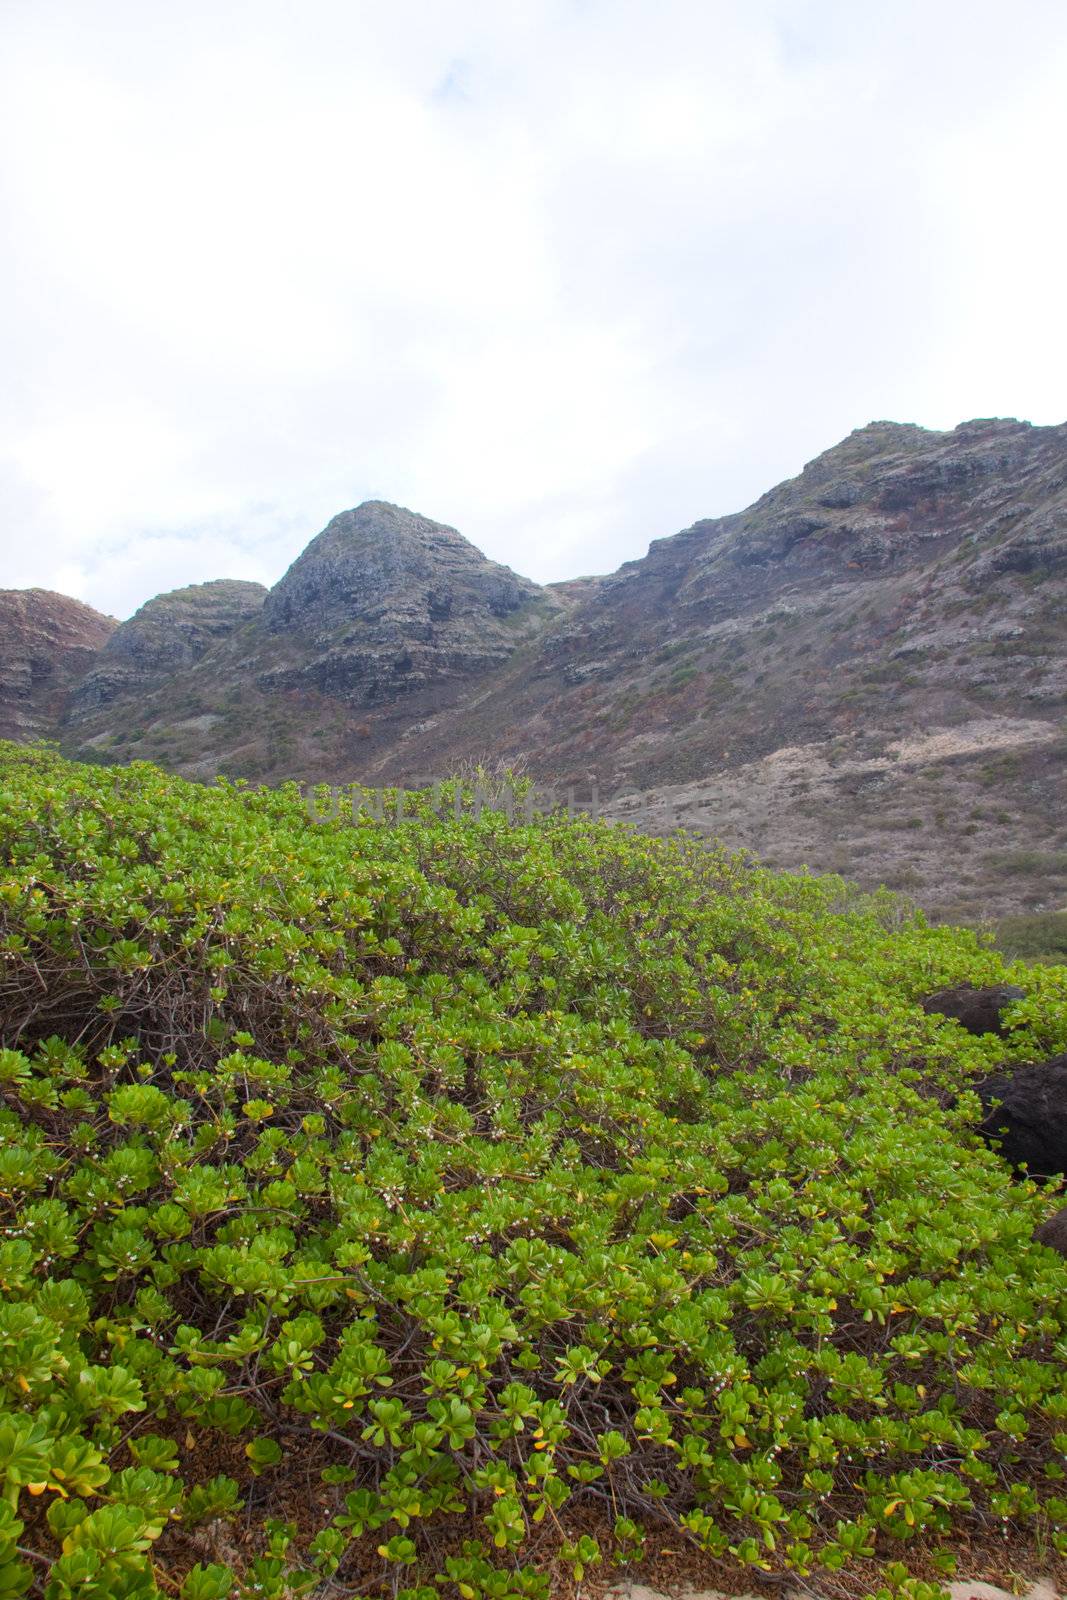 Vibrant green plants contrast against the dark drab colors of the mountains behind them in oahu hawaii.